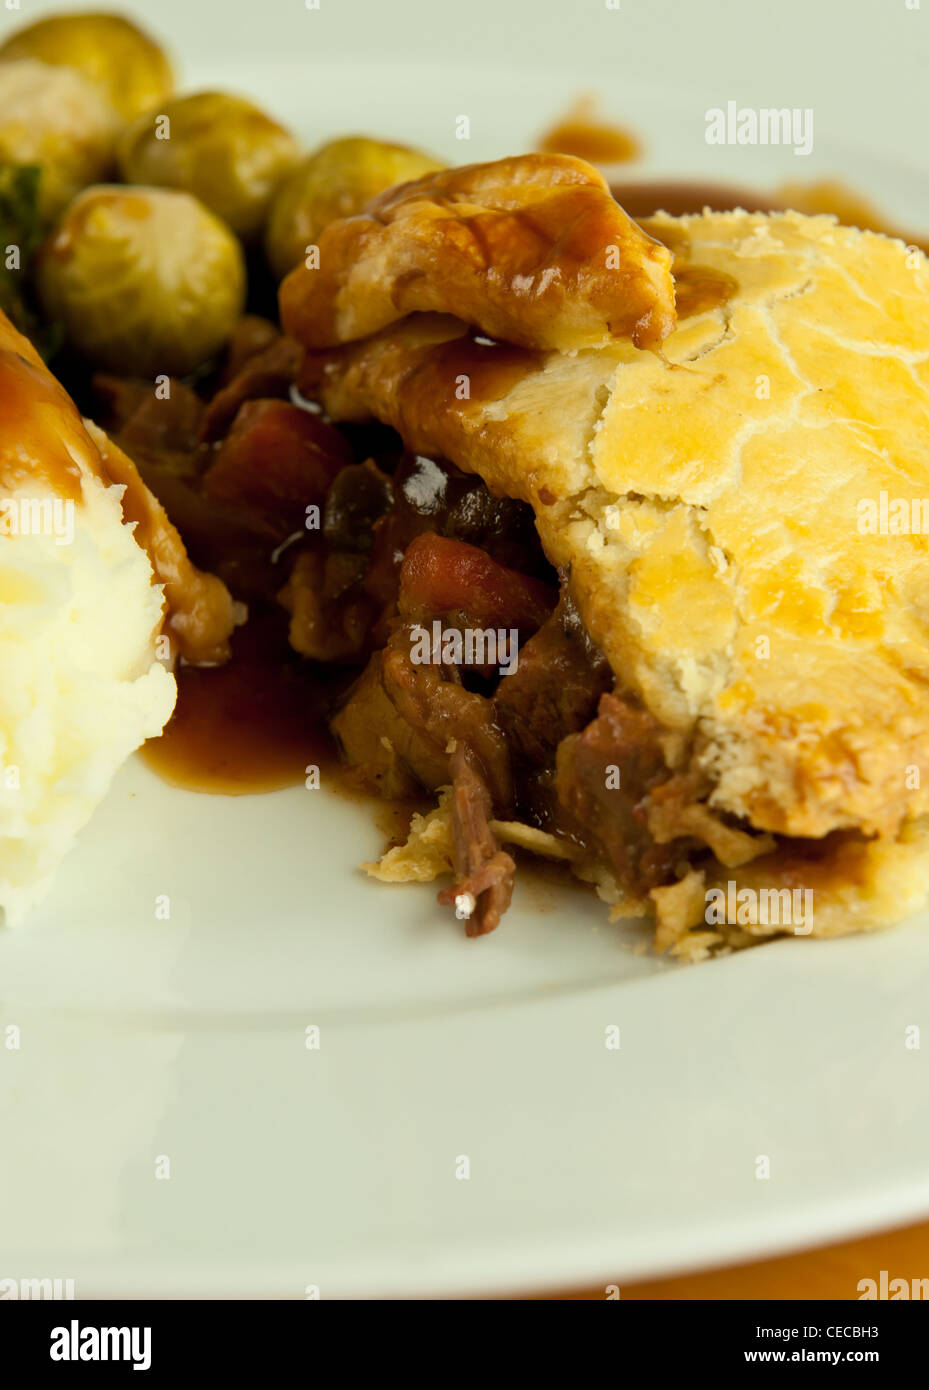 A slice of steak and ale pie Stock Photo